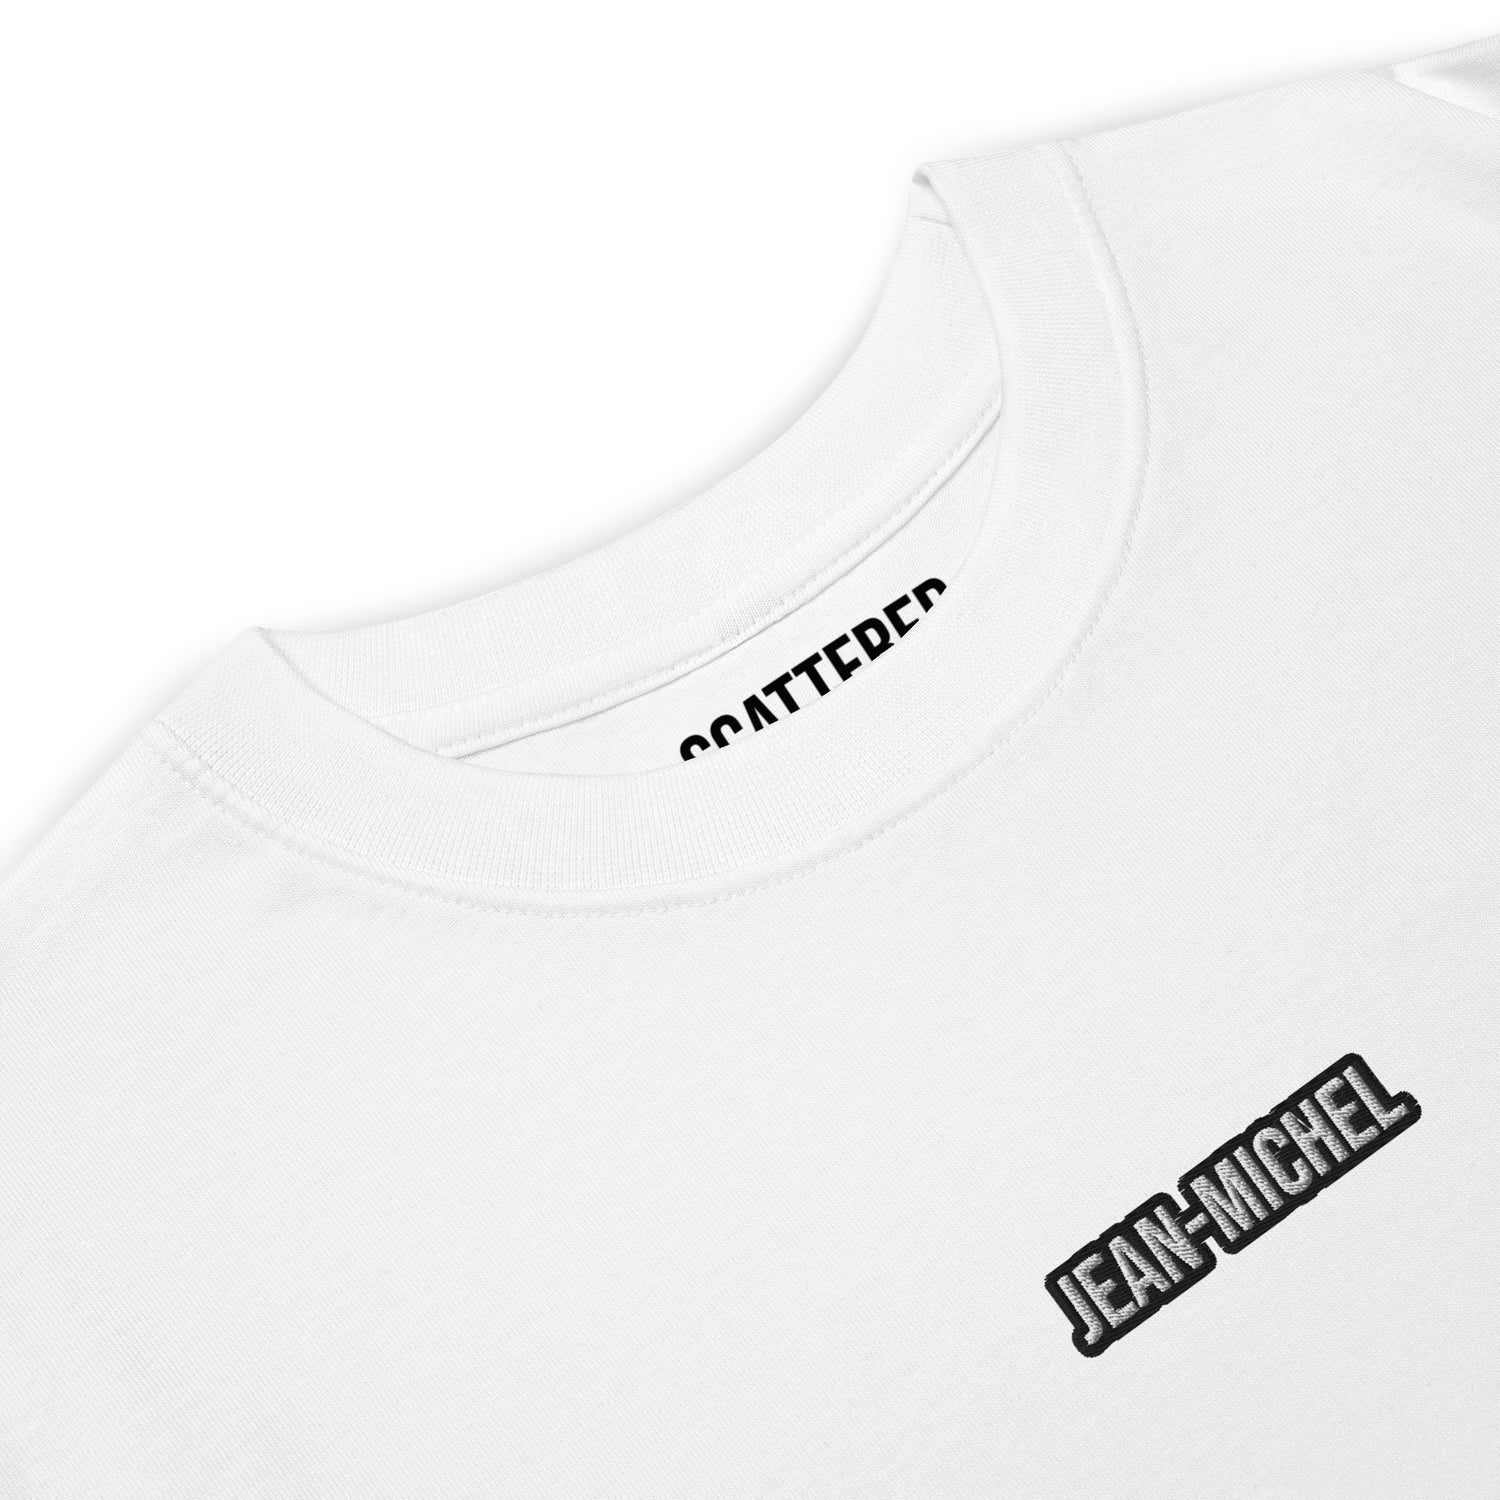 Jean-Michel Basquiat "Untitled" Artwork Embroidered + Printed Premium White Streetwear T-shirt SCattered